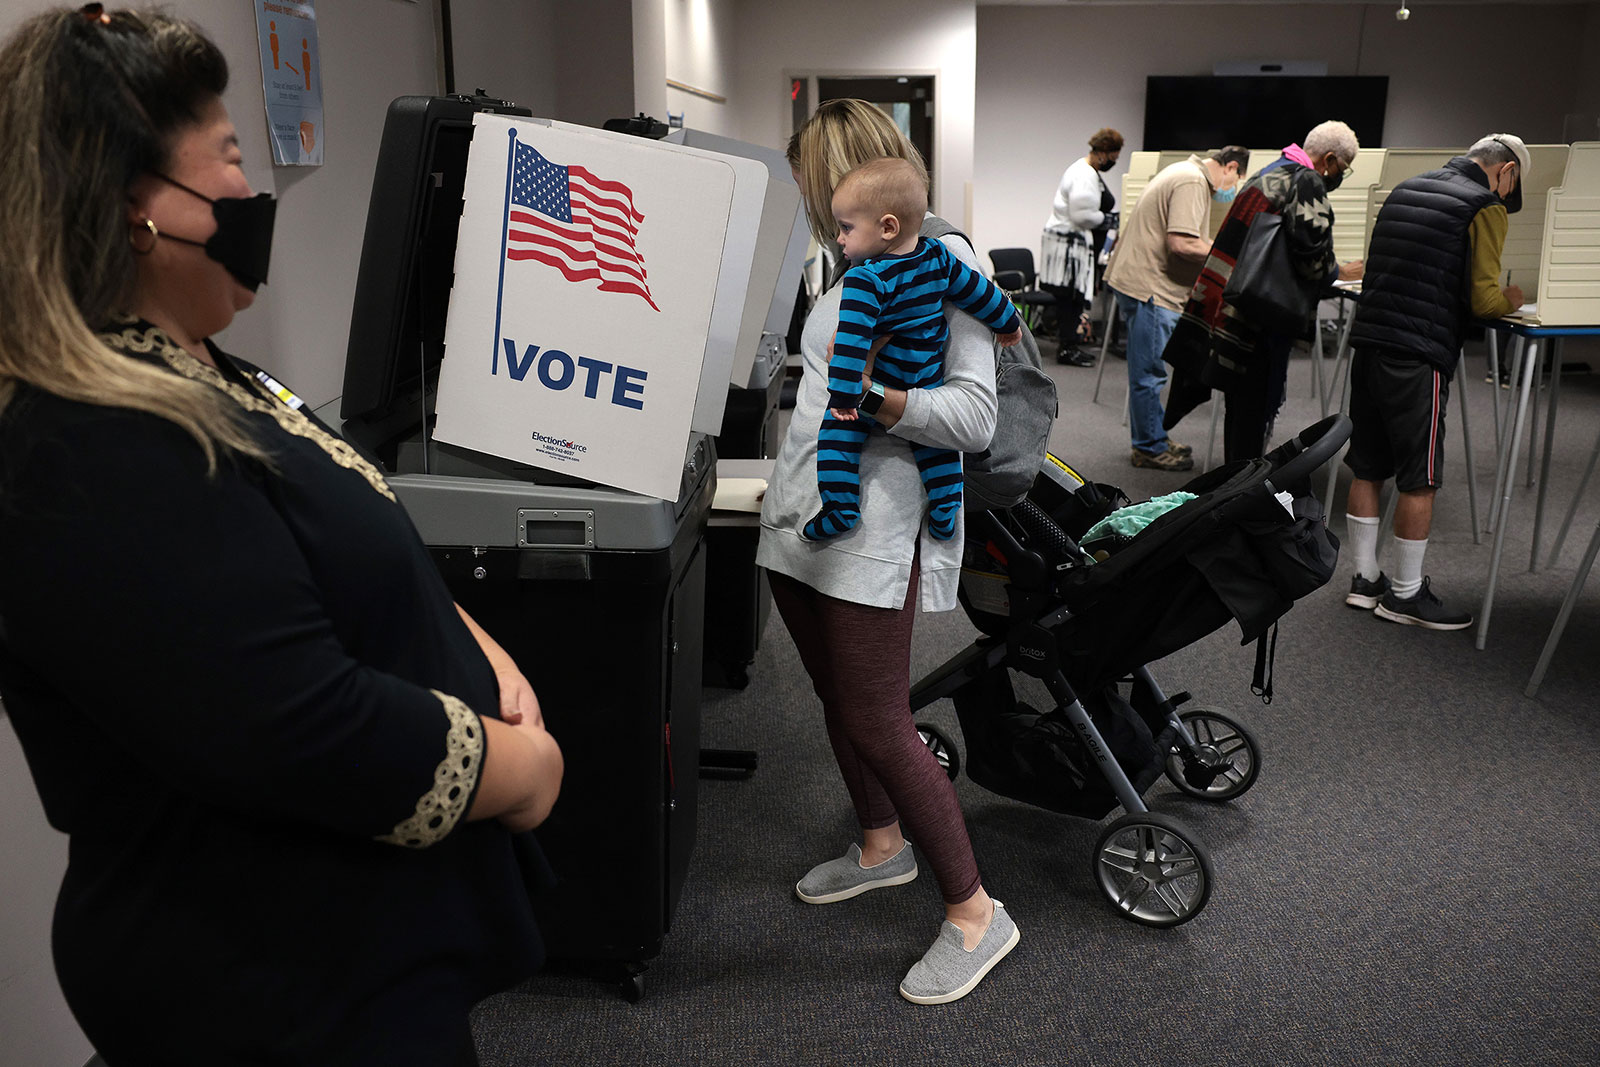 Voters cast their ballots in Fairfax, Virginia, on Tuesday, November 2.